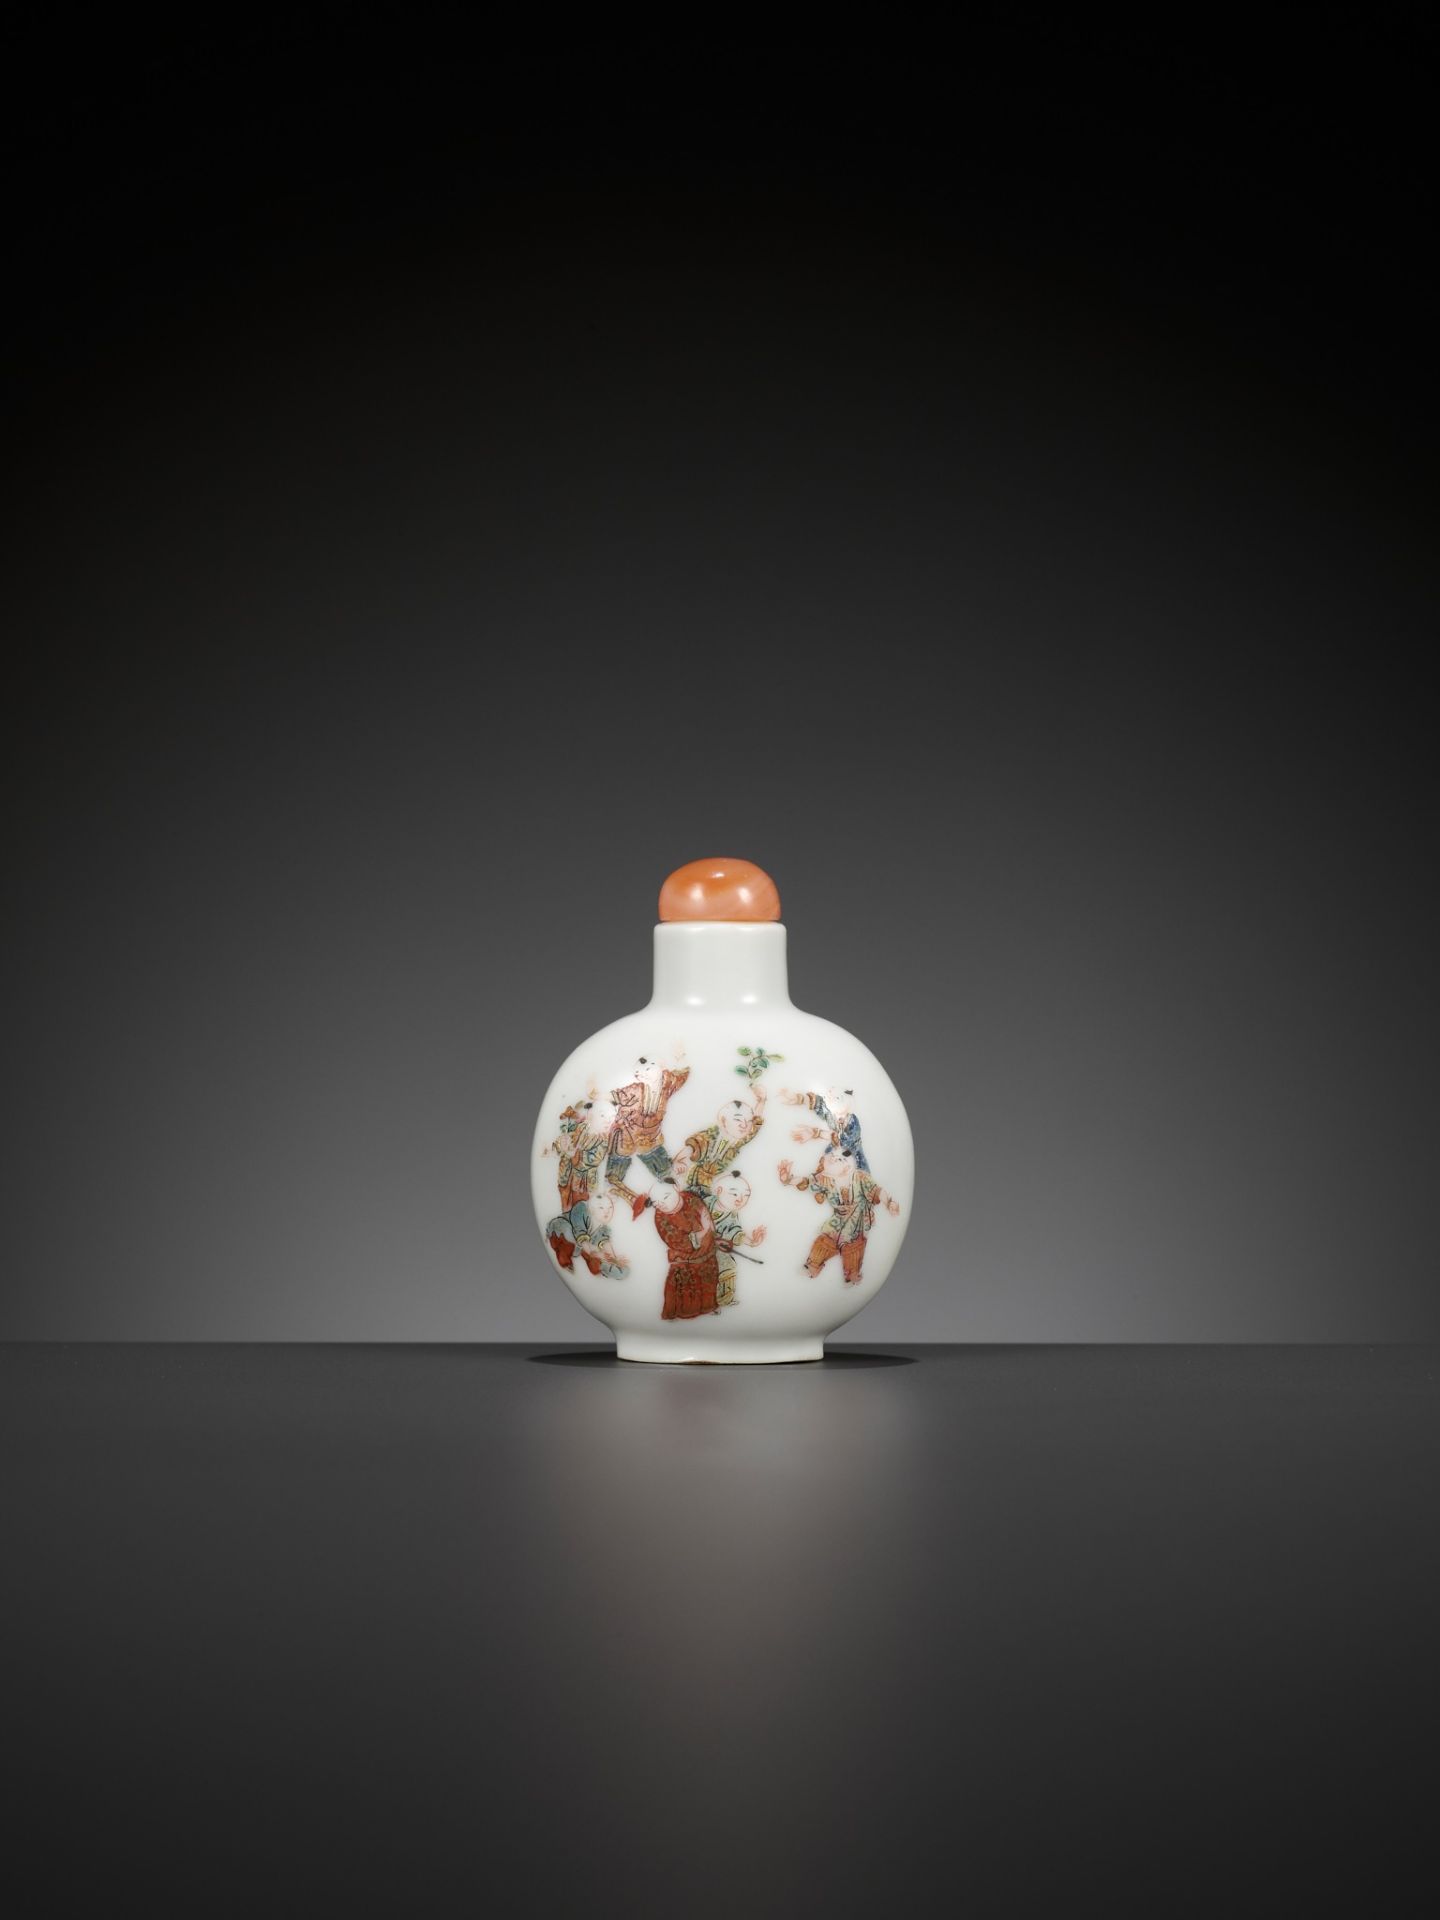 AN IMPERIAL FAMILLE ROSE 'BOYS AT PLAY' PORCELAIN SNUFF BOTTLE, DAOGUANG MARK AND PERIOD - Image 3 of 11